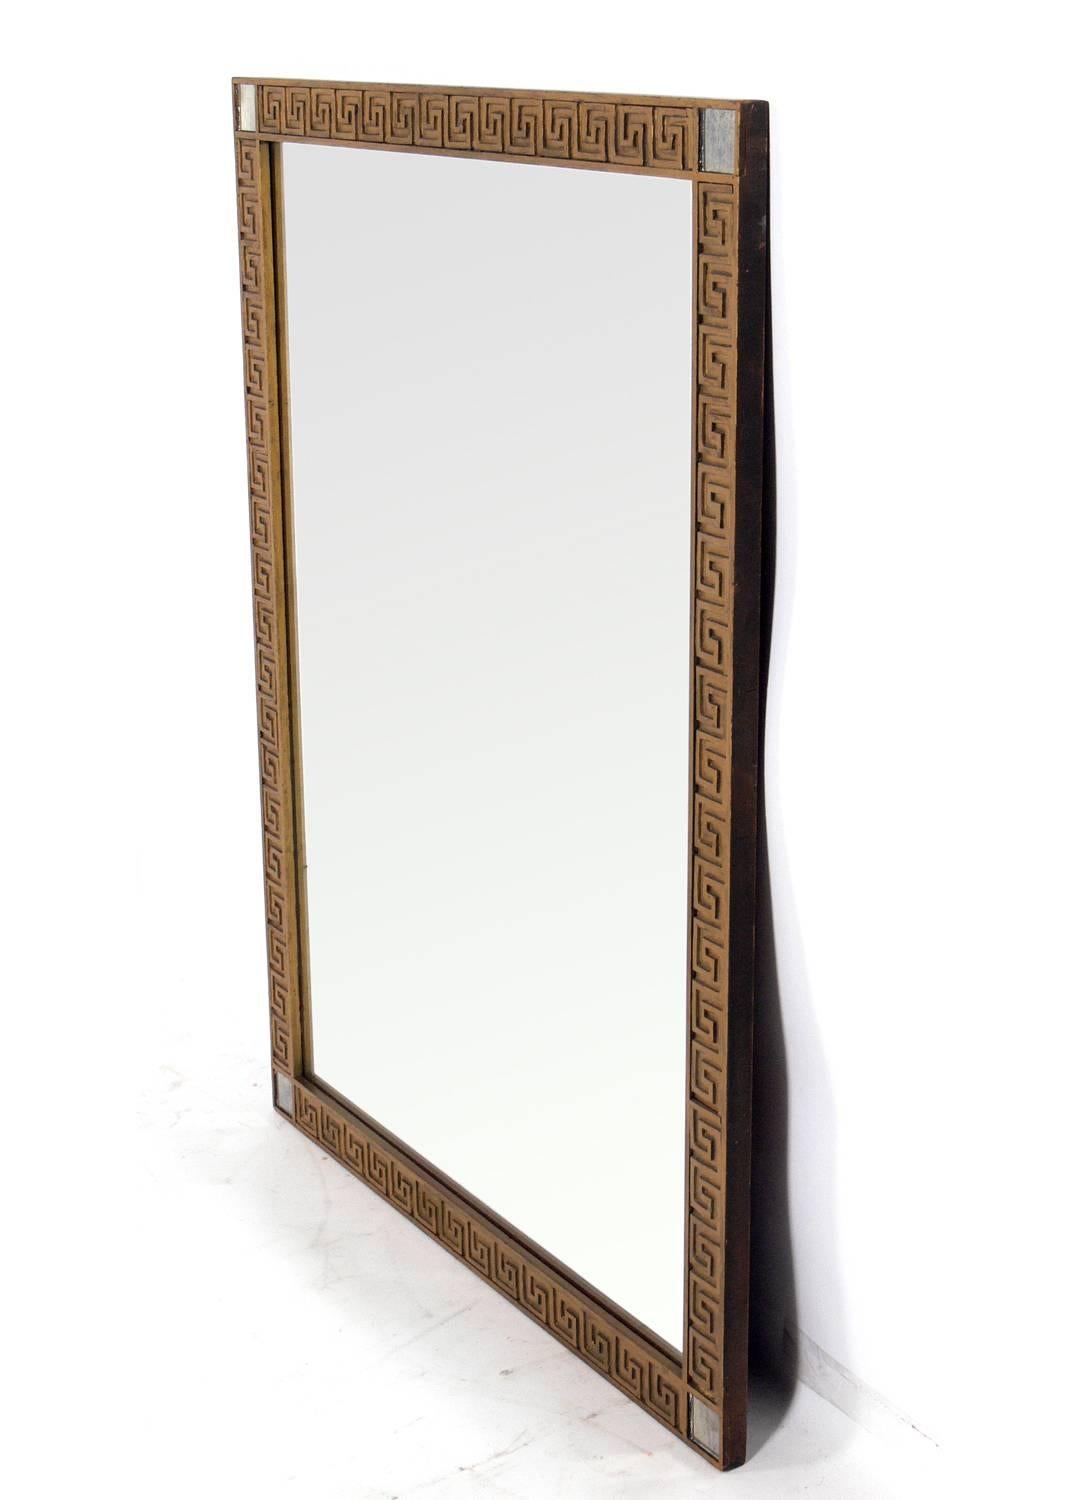 Elegant Greek key mirror, American, circa 1940s. It is constructed of gold painted wood frame with inset antiqued mirrors at the corners and mirrored glass in the center. Retains its warm original patina to the frame and mirror.